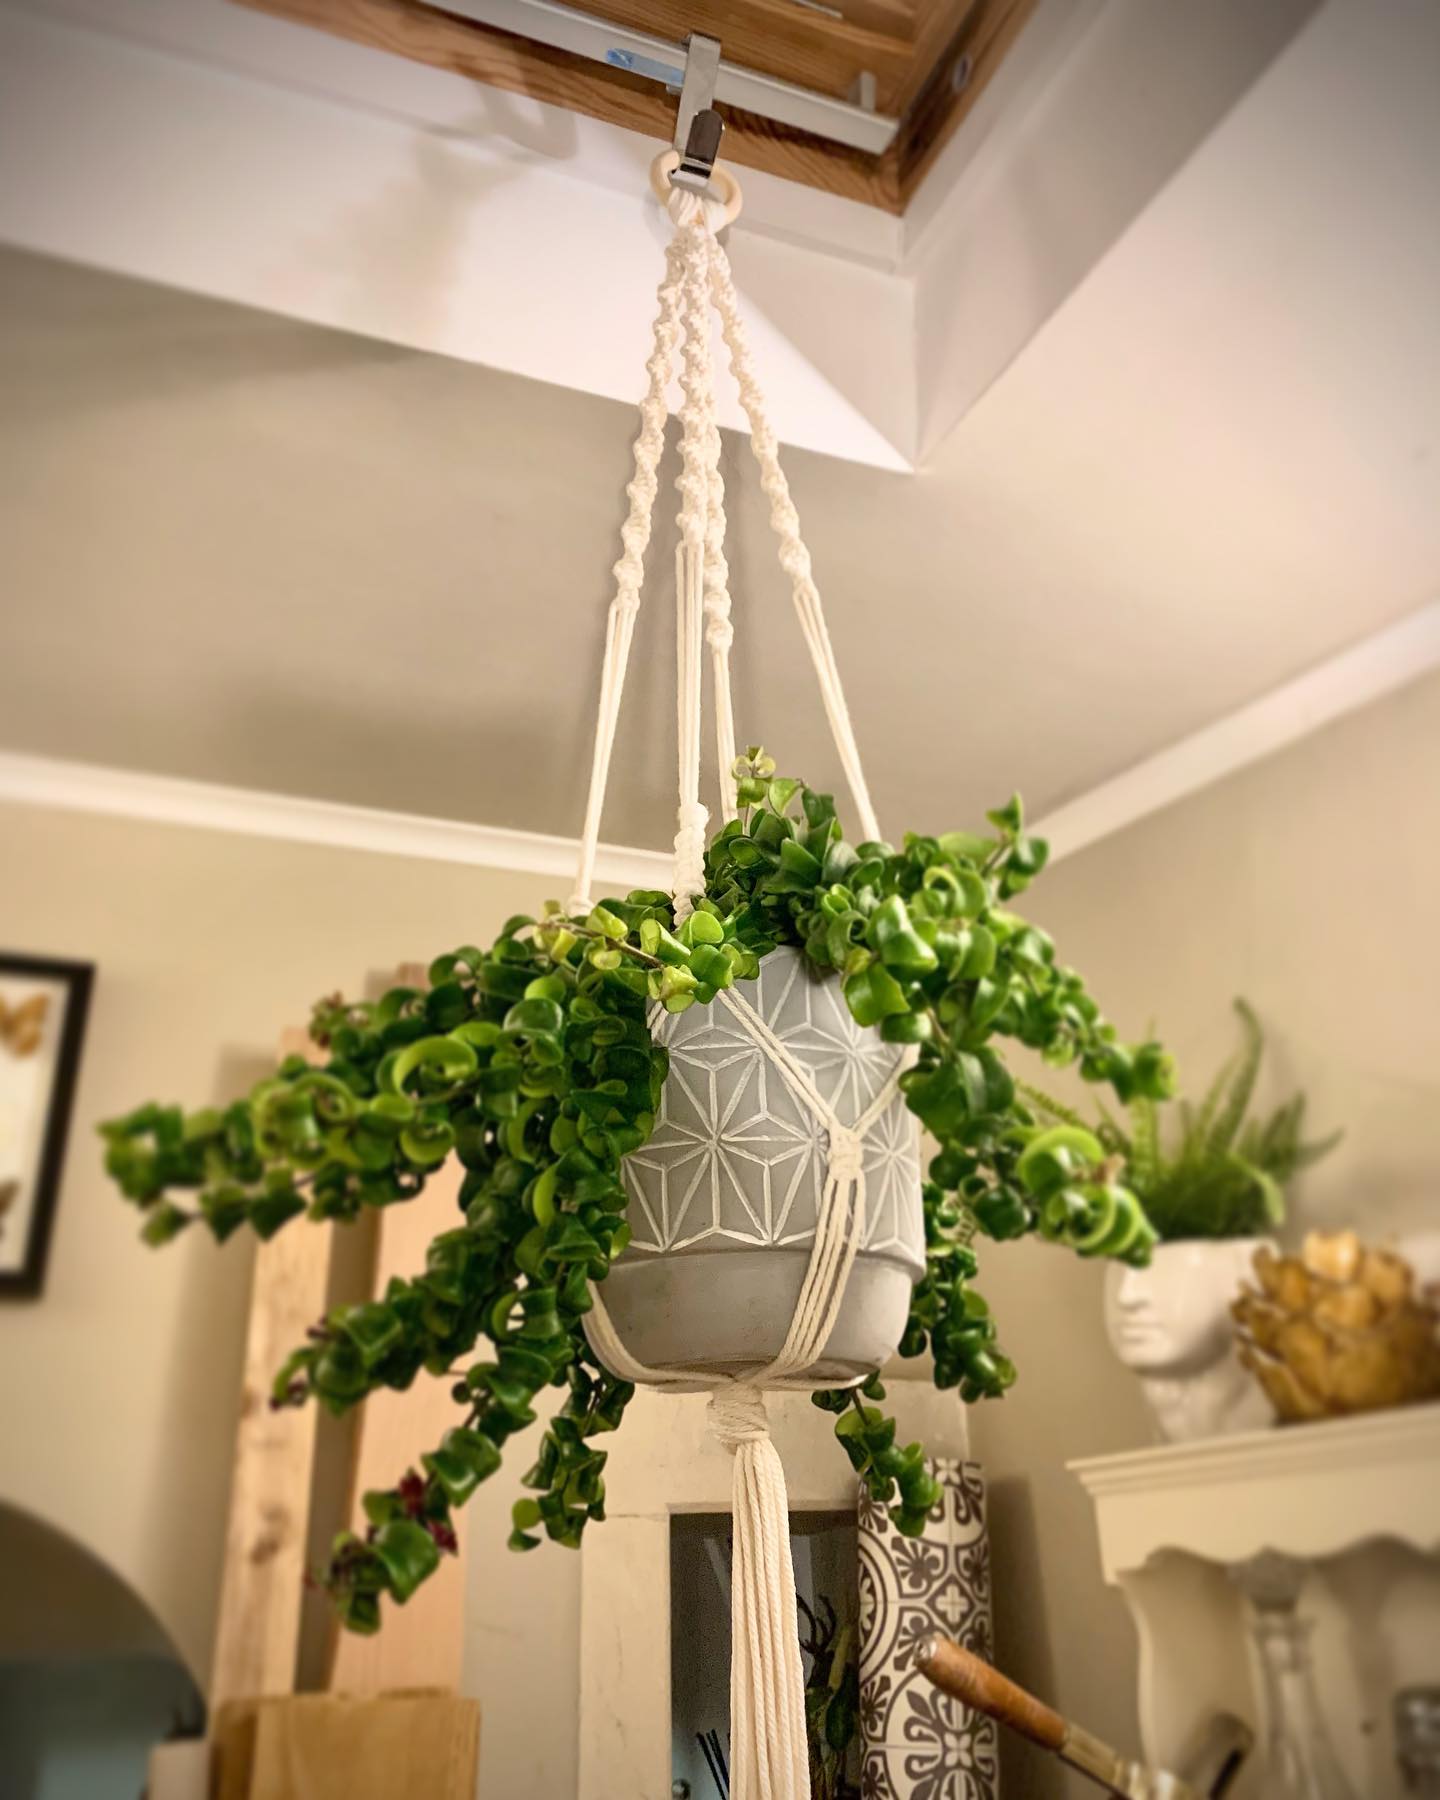 A first attempt at Macrame! Quite satisfying to try a new craft during some down time between Christmas and New Year. And looking forward to filling our home with knotted makes! ? need to buy more plants! ...#craft #newthings #newyear #2021 #macrame #homedecor #handmade